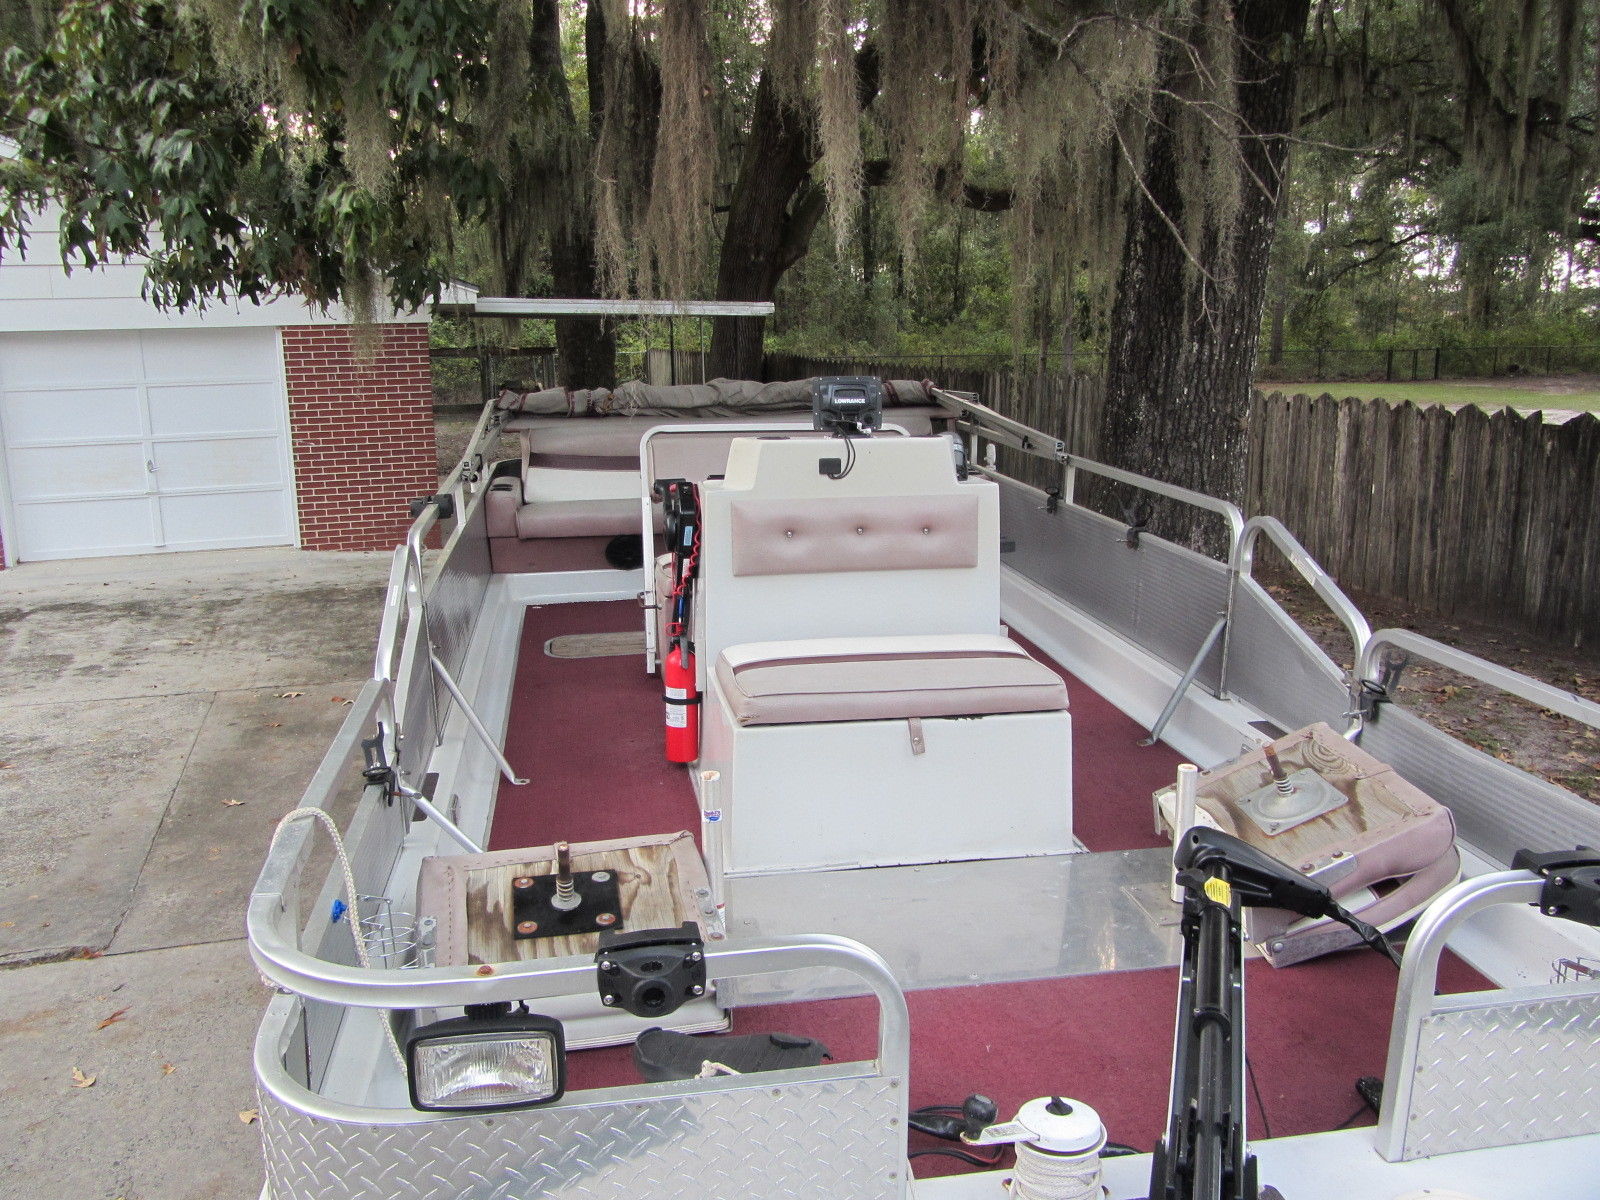 Godfrey Hurricane 1988 for sale for $4,500 - Boats-from-USA.com